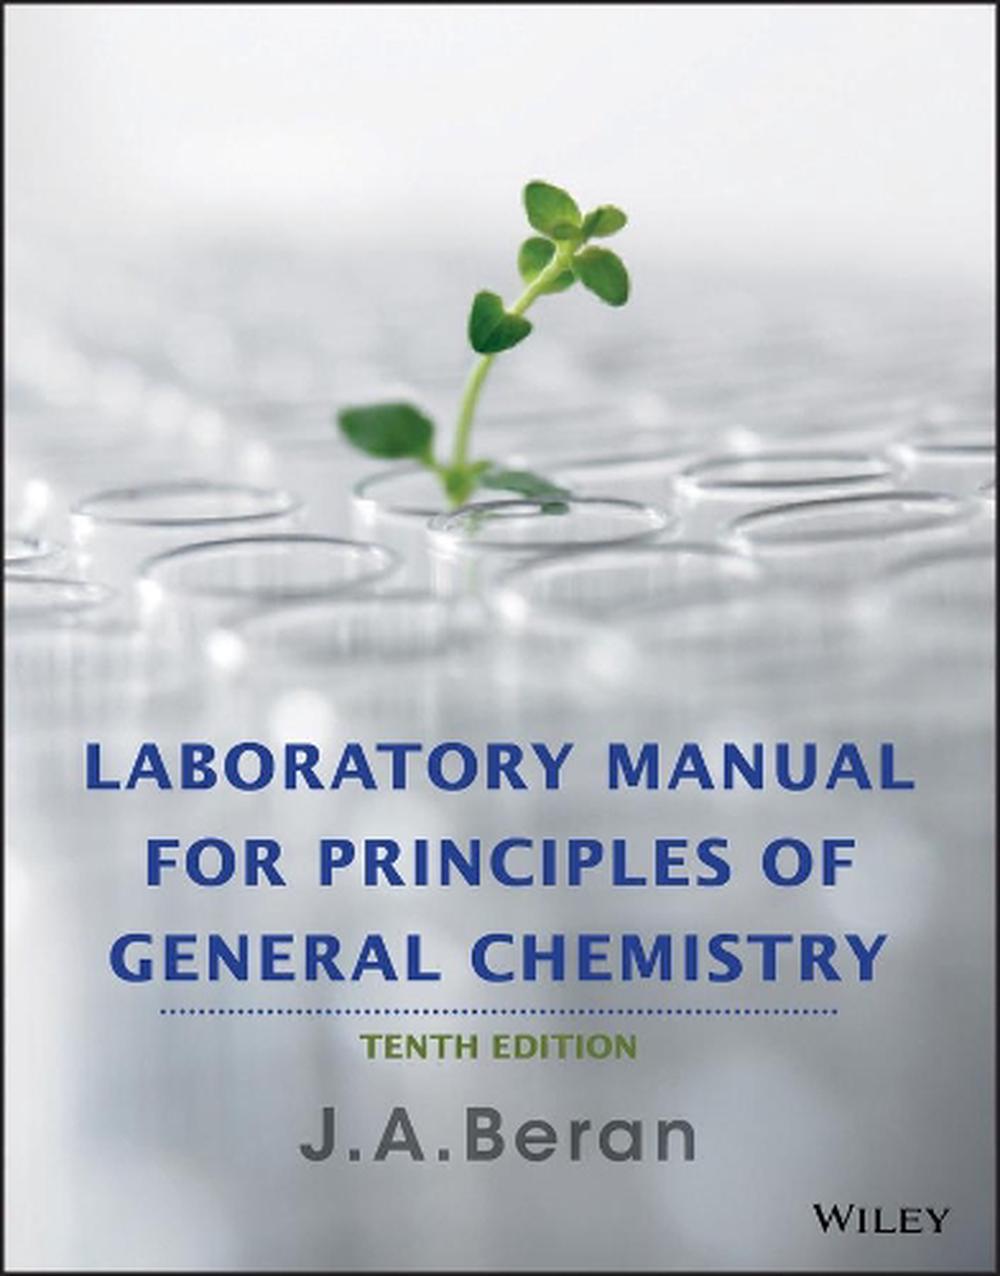 Laboratory Manual for Principles of General Chemistry by J.A. Beran (English) Pa 9781118621516